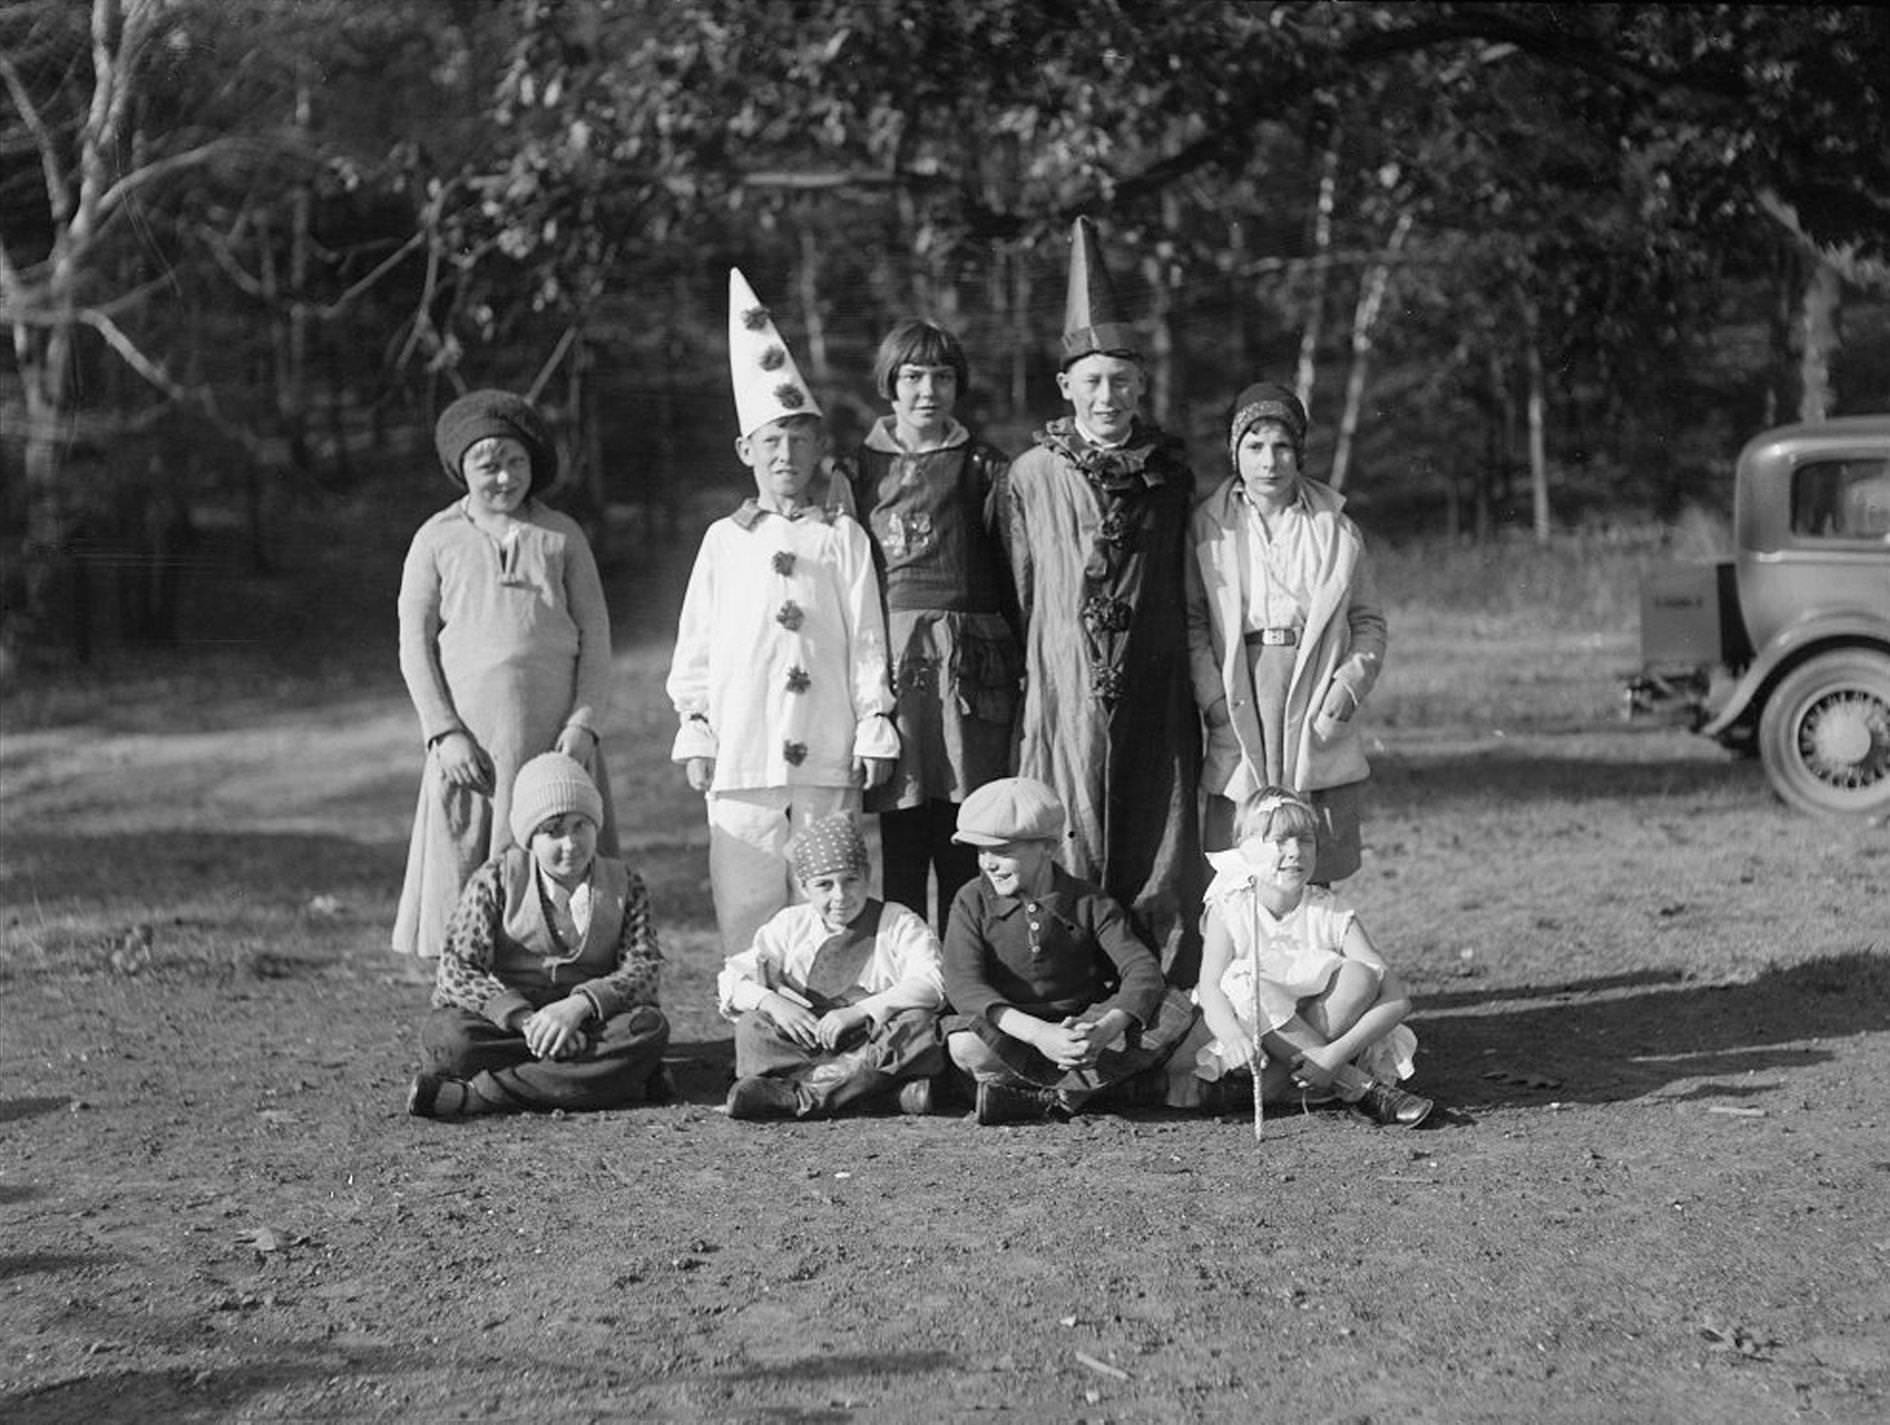 Victoria Park Forest School, Halloween party, group of nine, October 28, 1929.